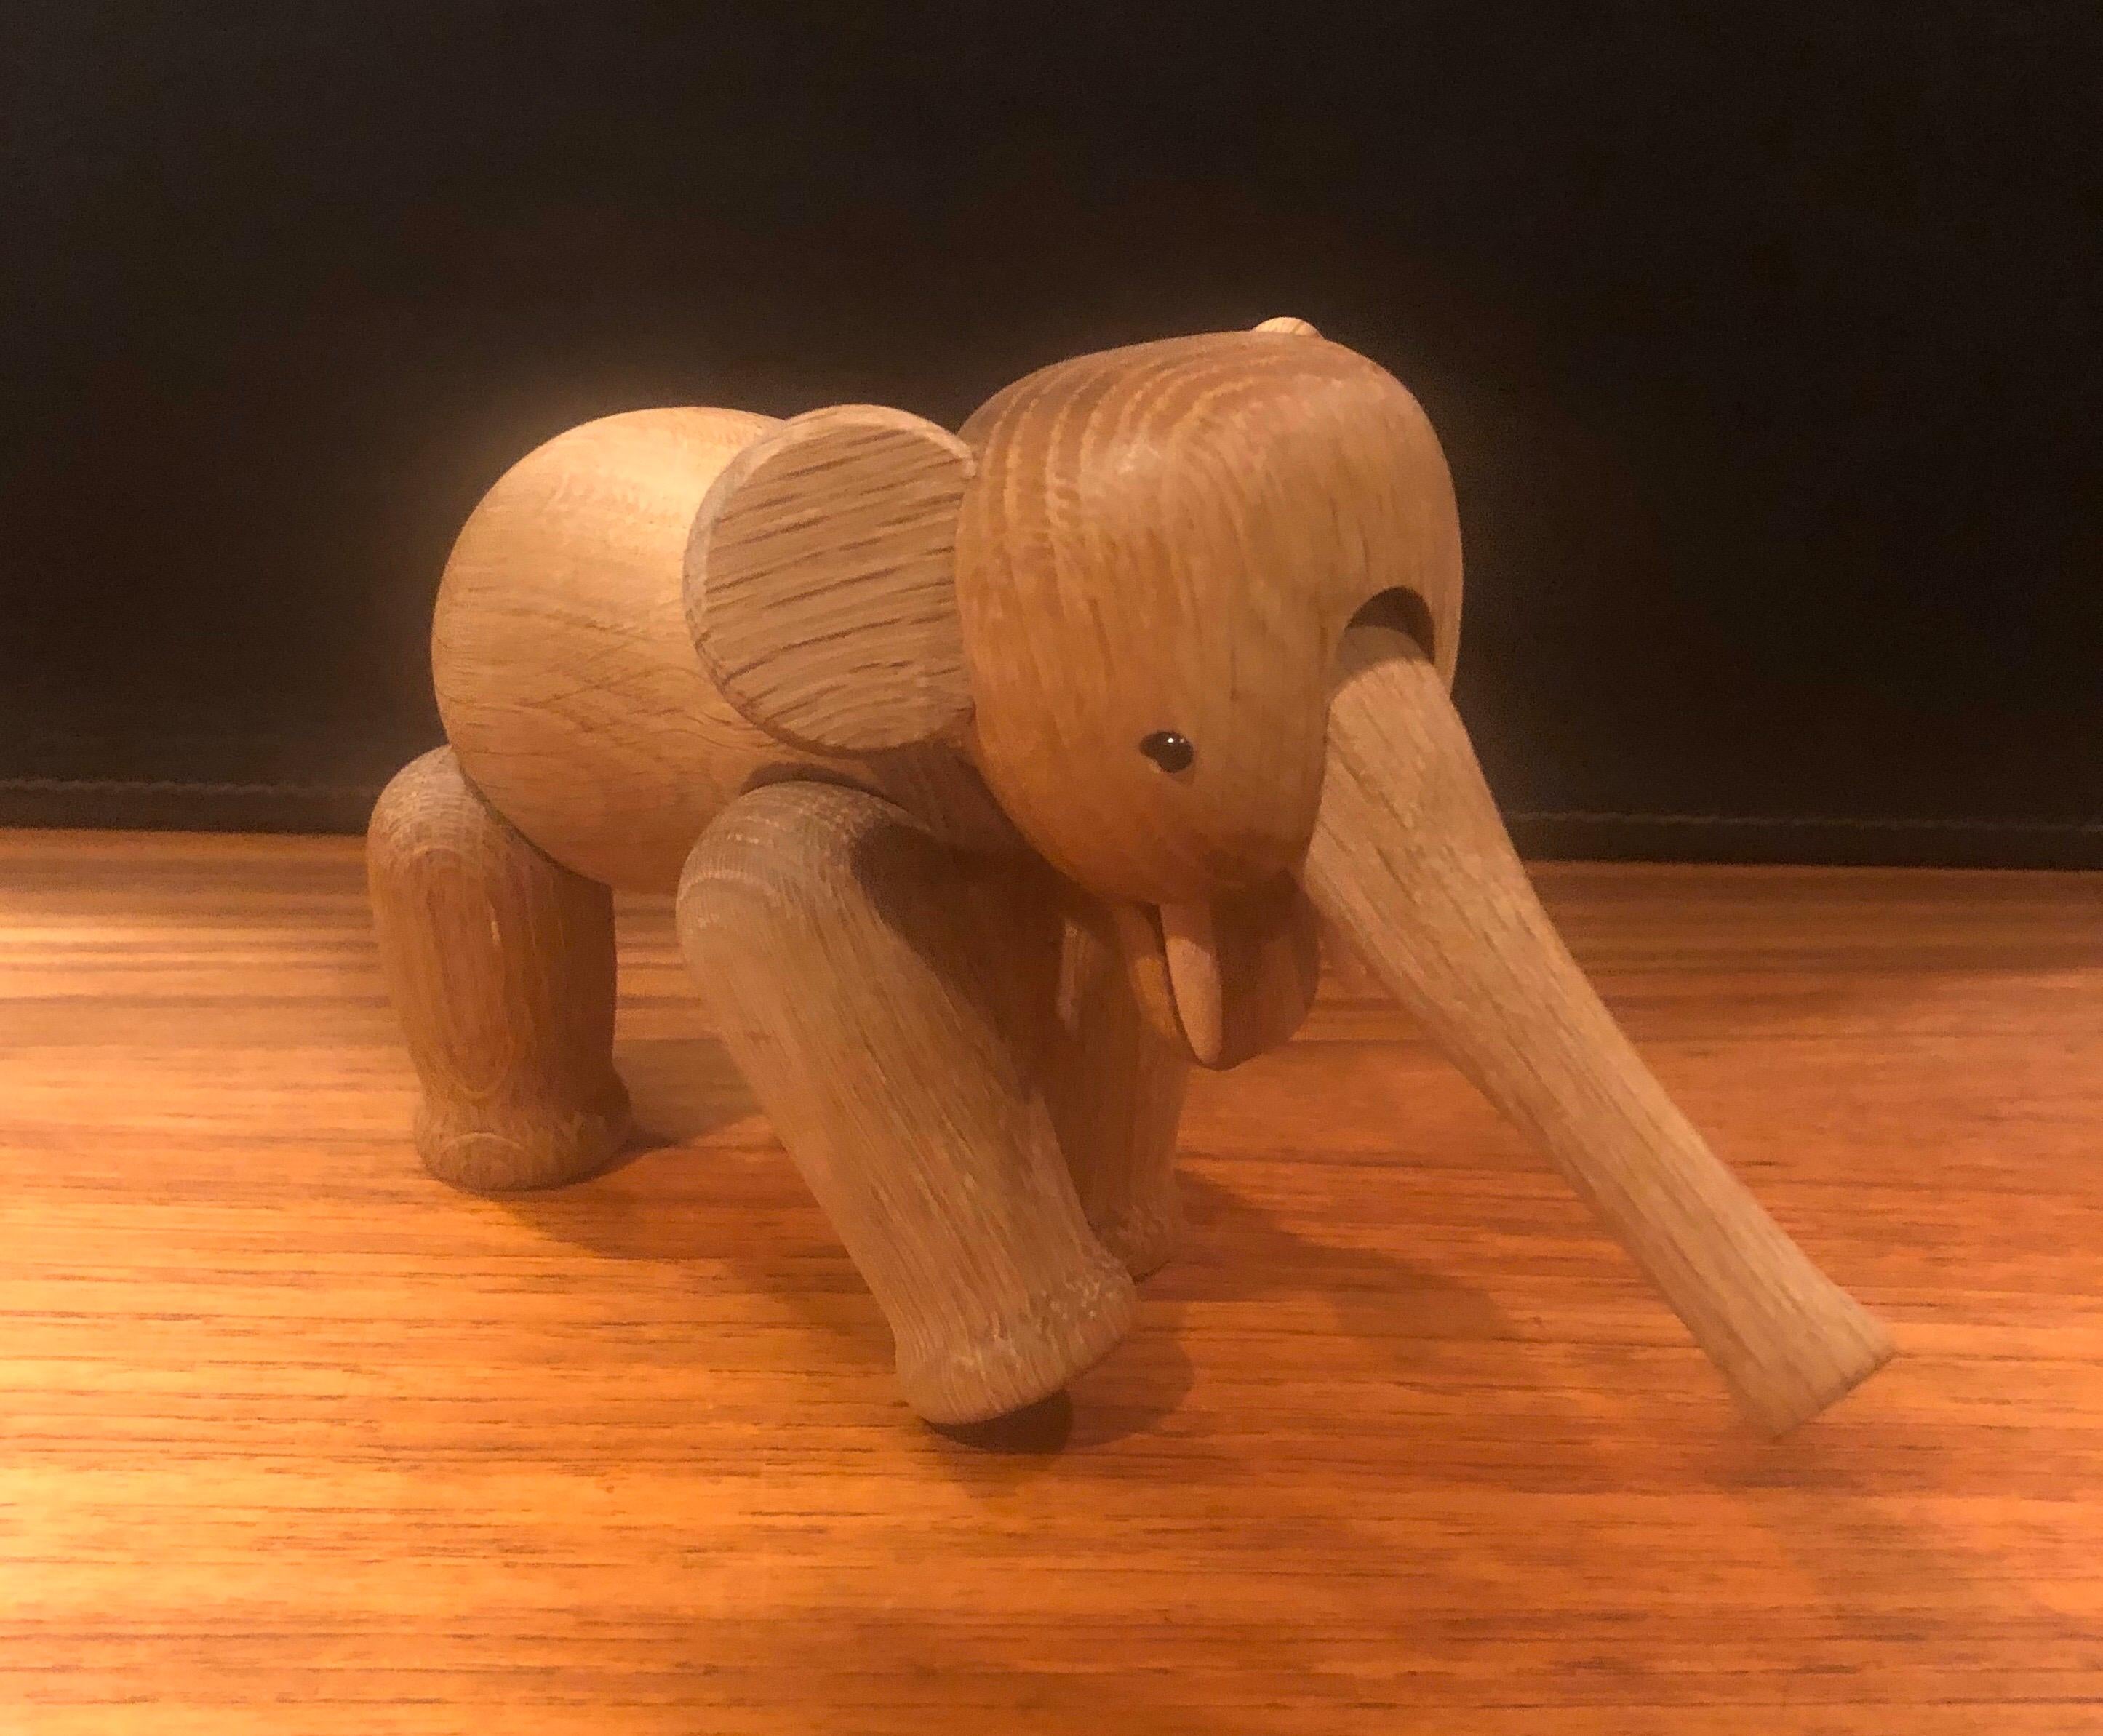 Articulated Toy Elephant by Kay Bojesen 1